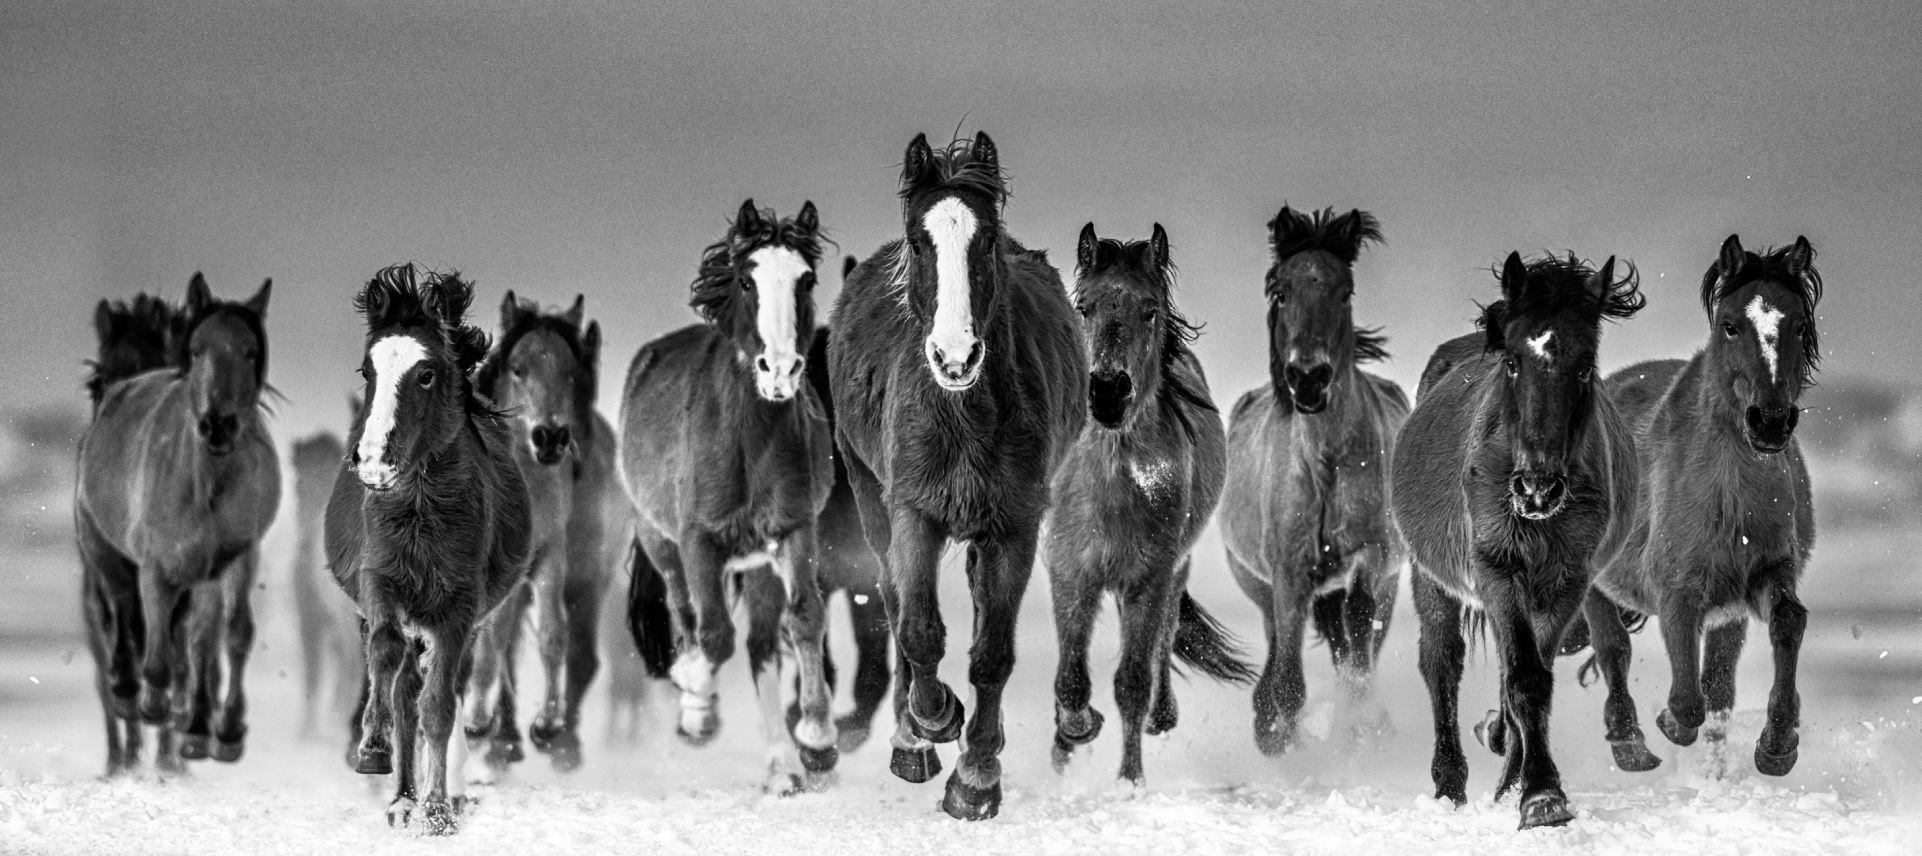 David Yarrow Landscape Photograph - The Rolling Stones - wild mustang horses galloping in the snow 